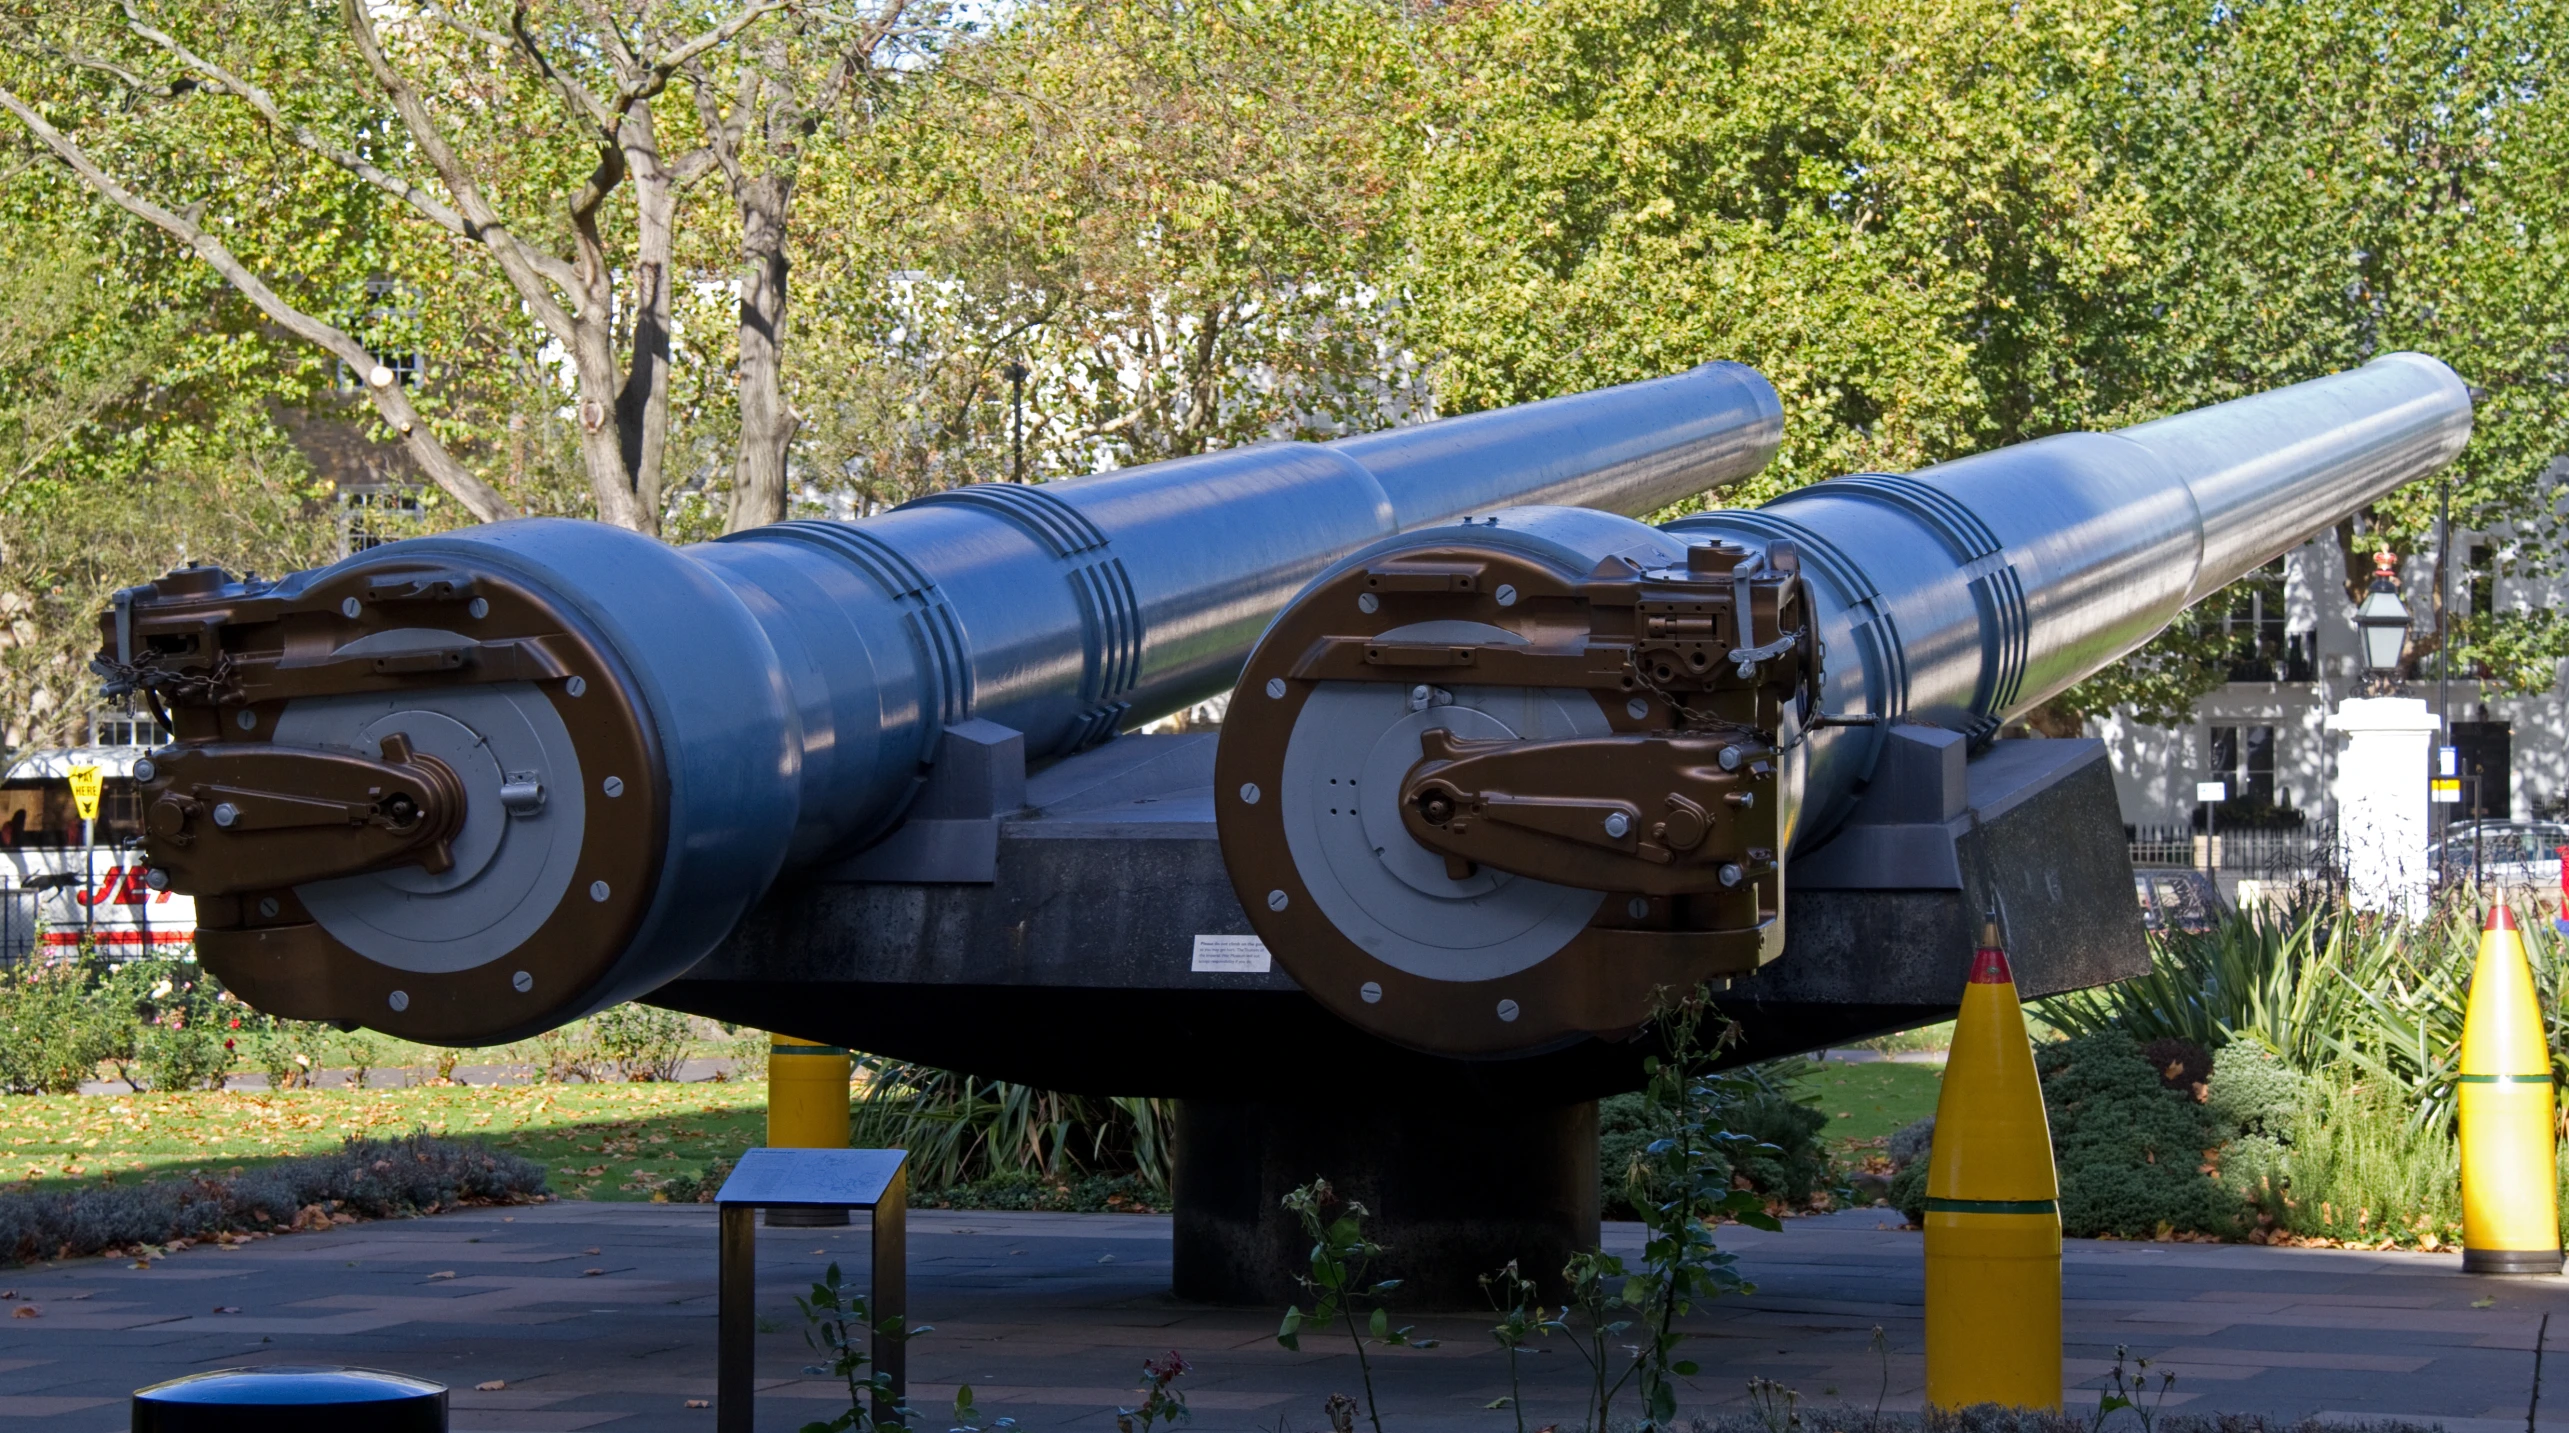 the large artillery is sitting on display in a park